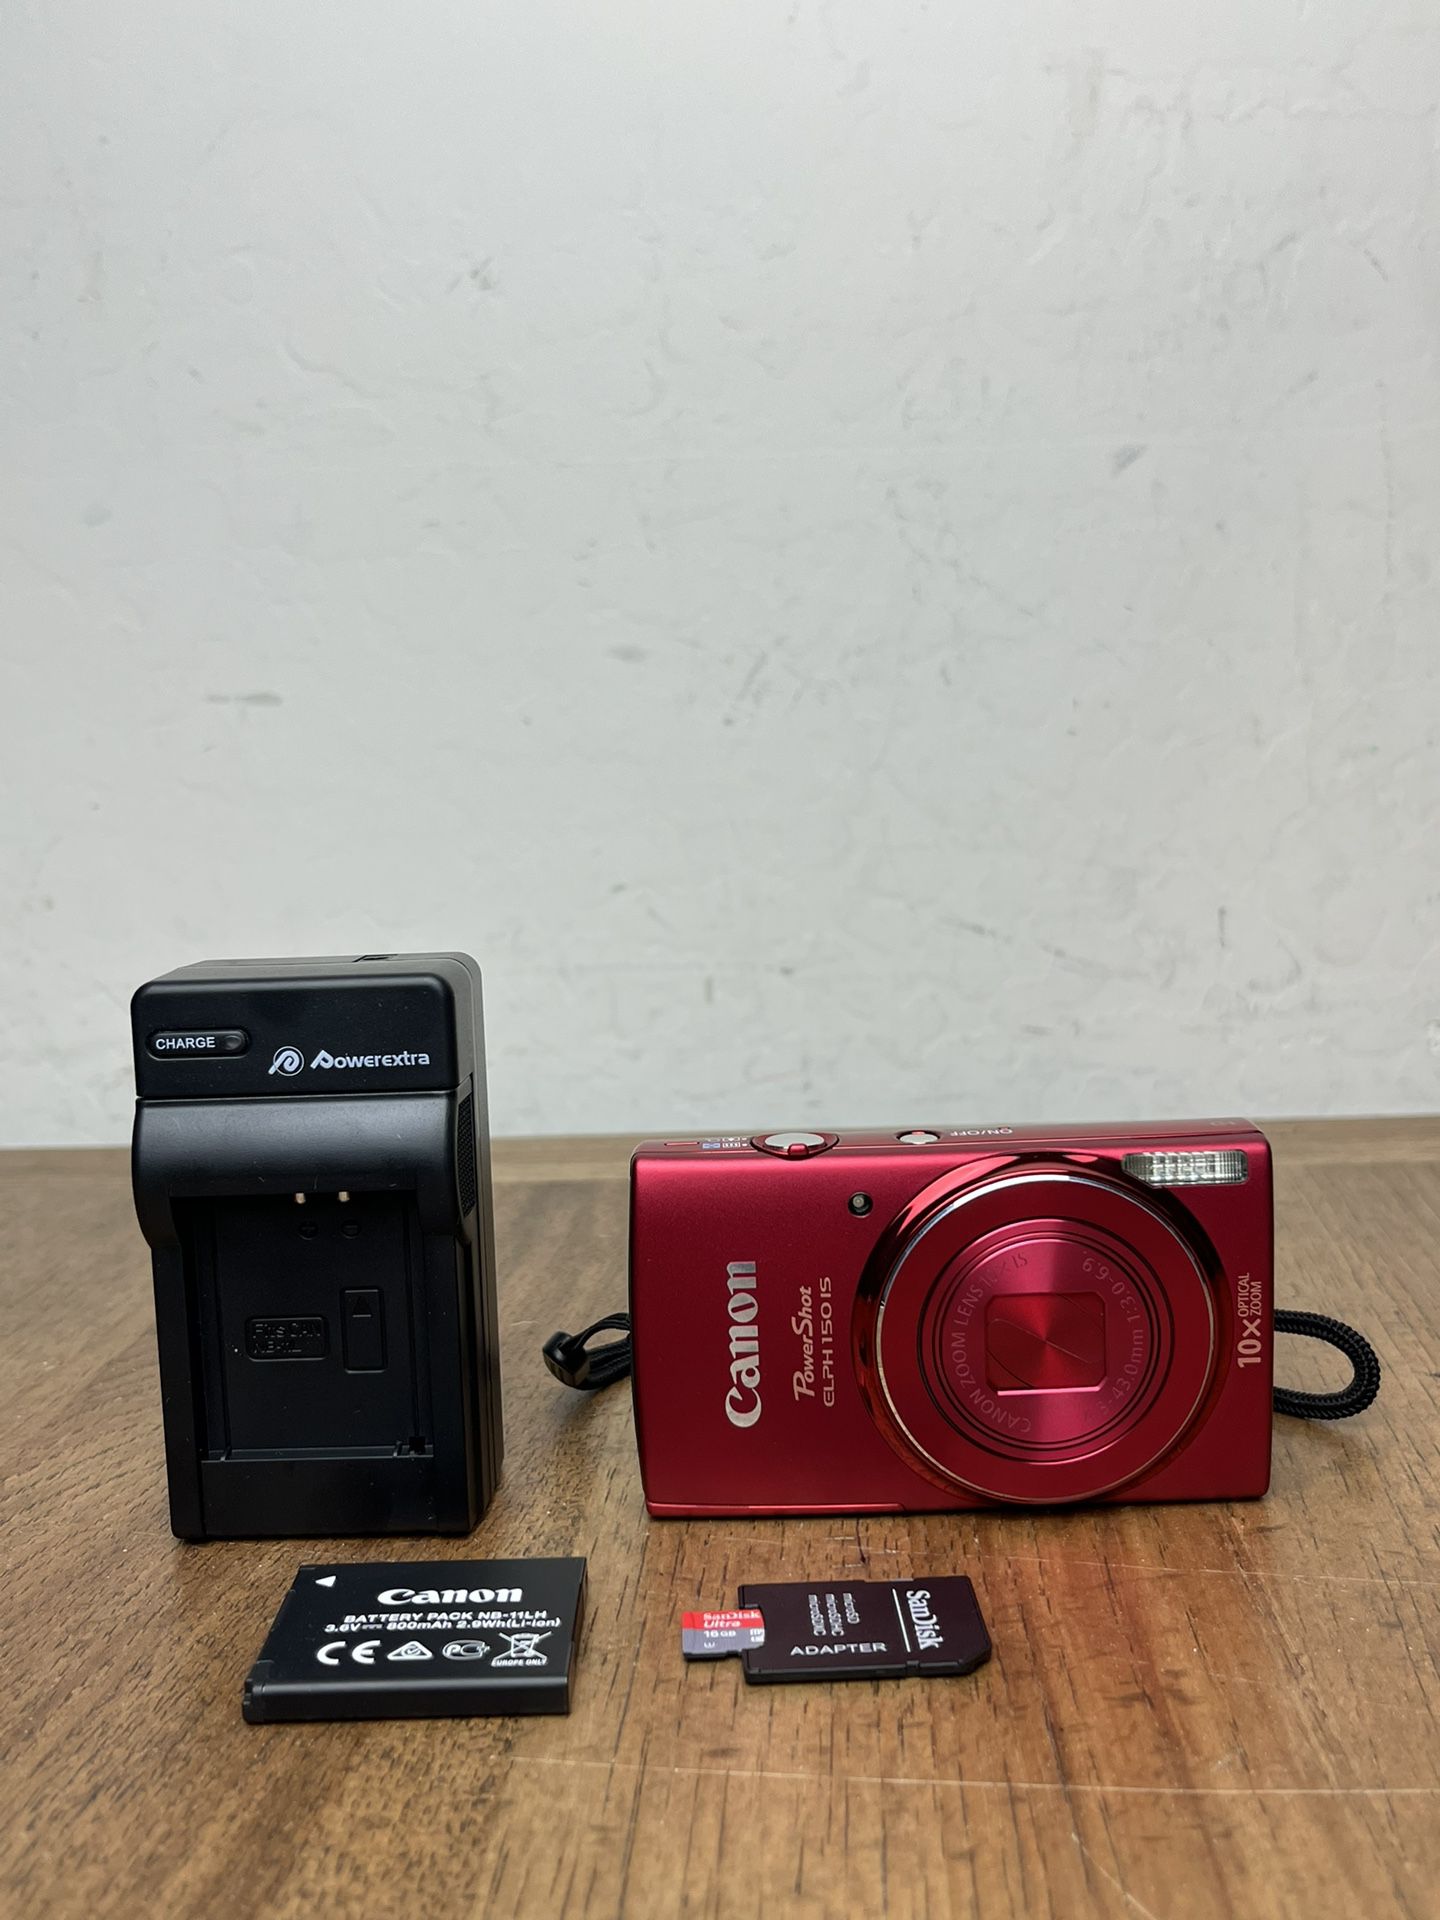 Canon PowerShot ELPH 150 IS 20MP Digital Camera 10x Zoom - Red 16 GB Card